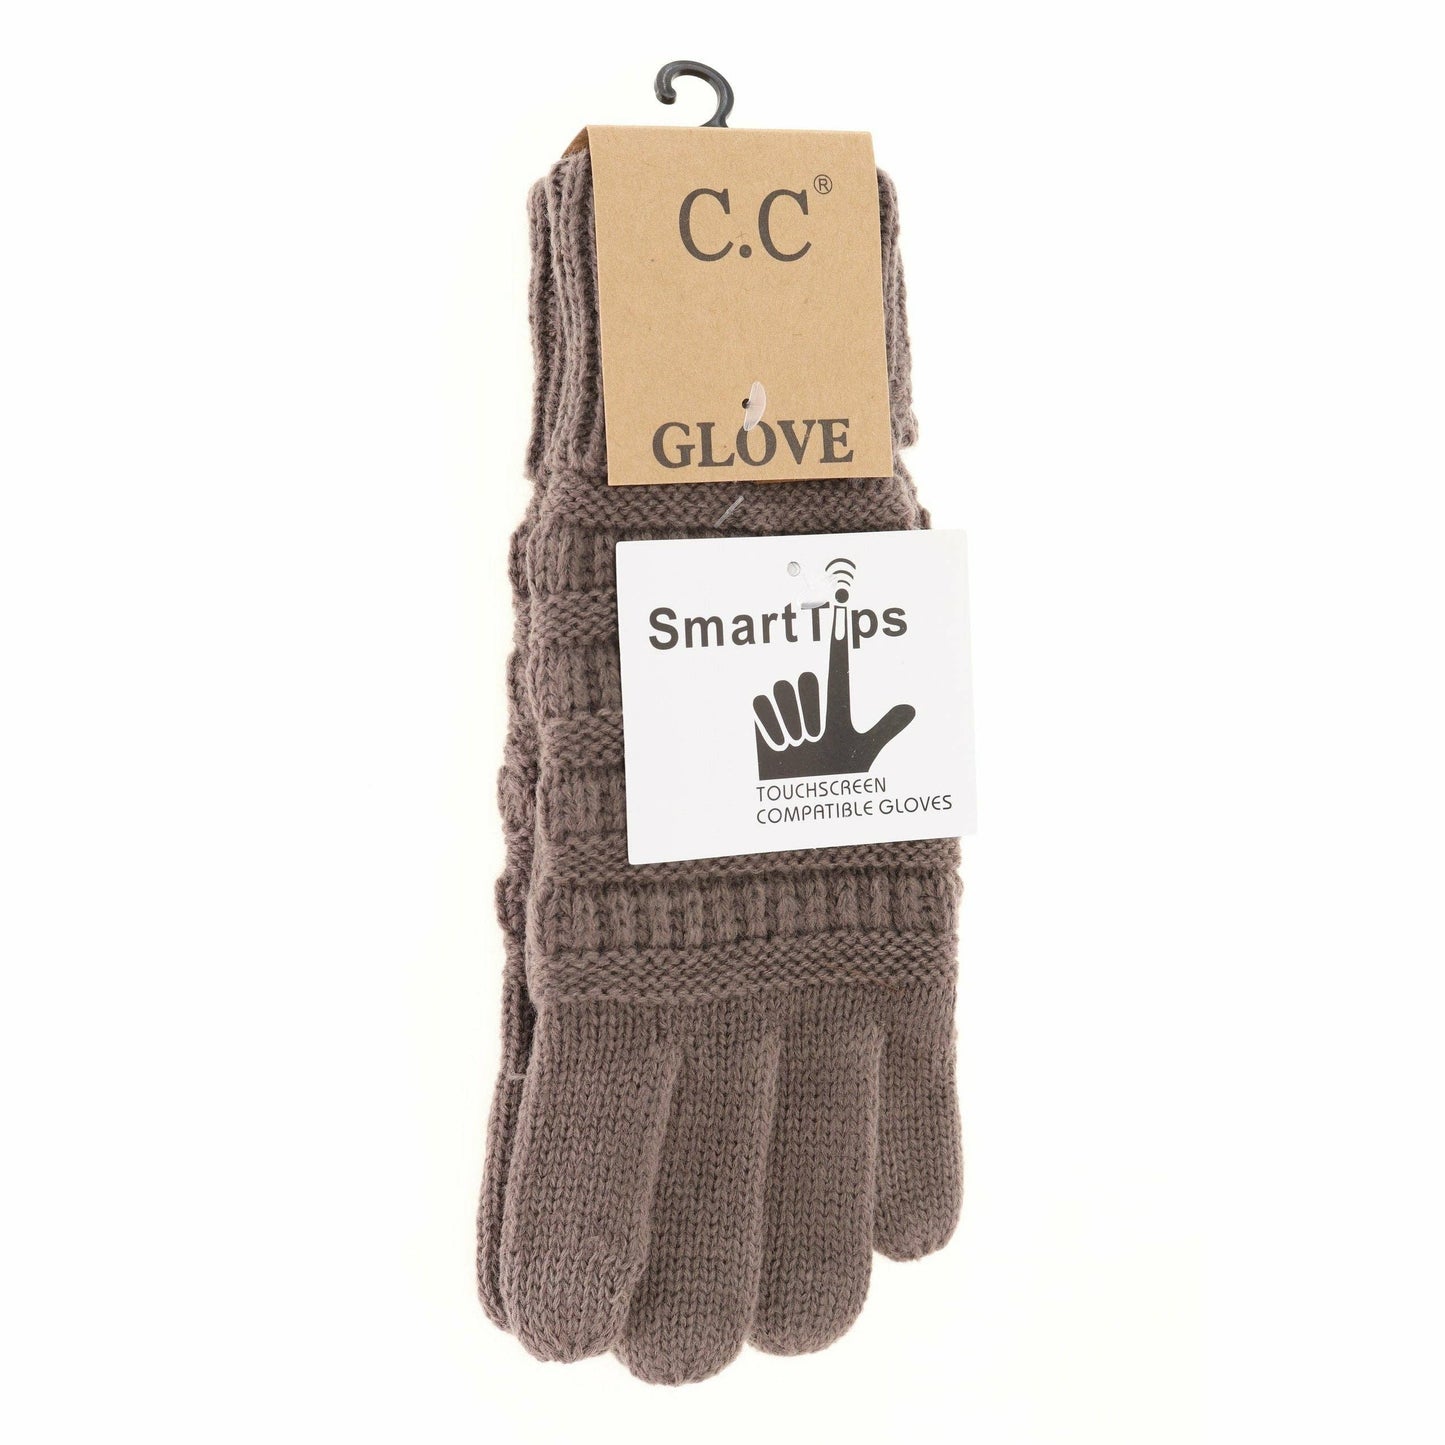 Cable Knit CC Gloves